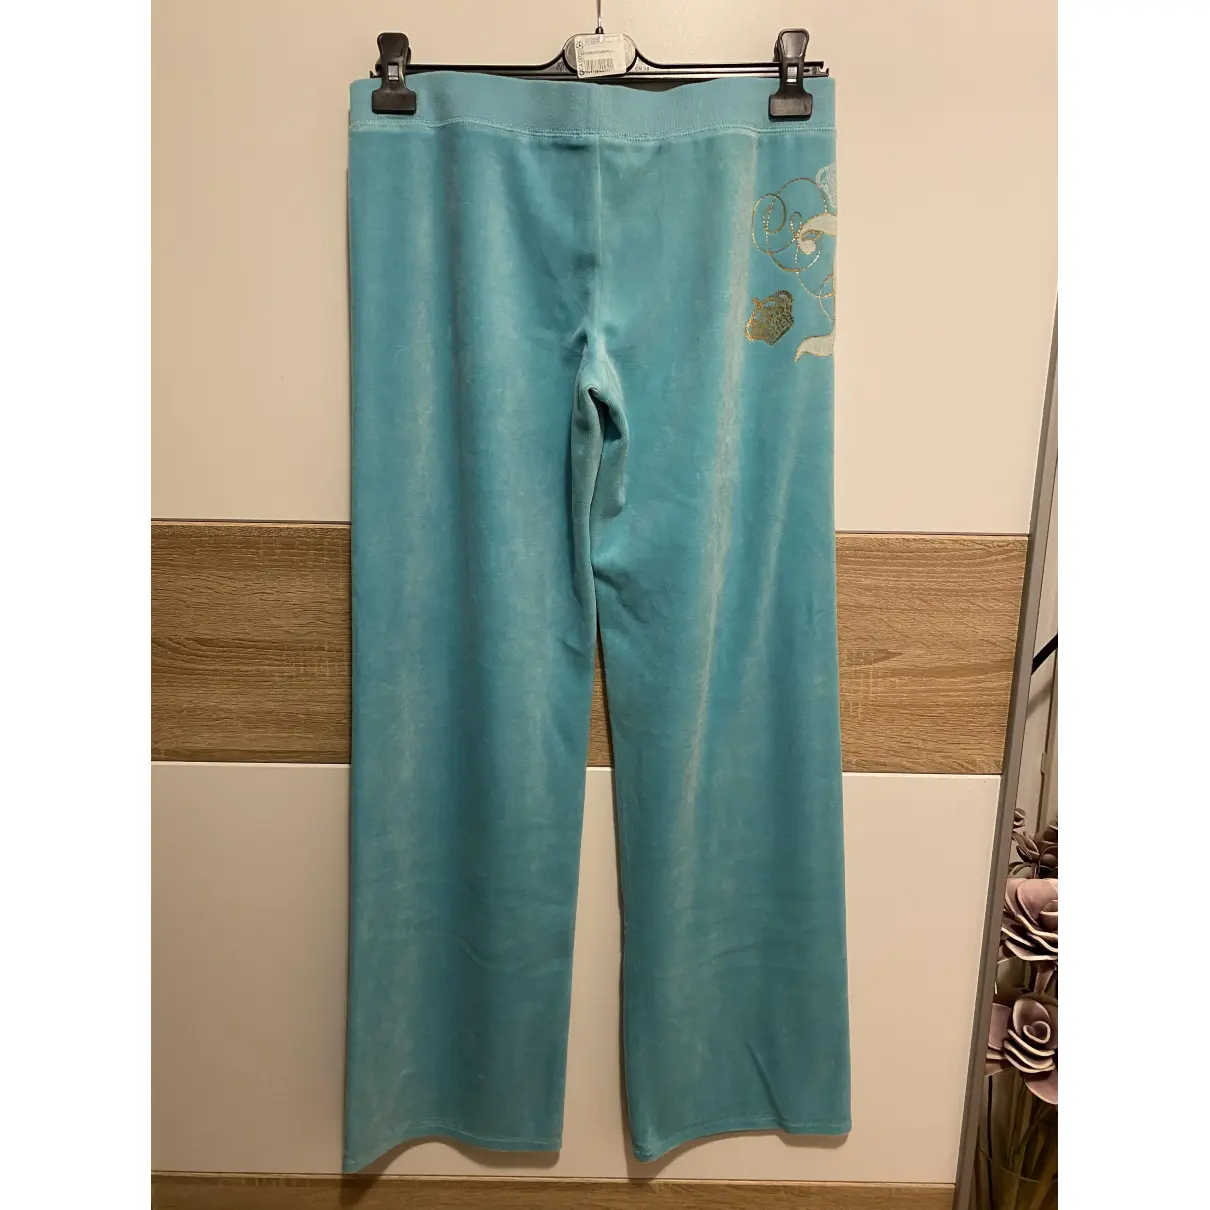 Buy Juicy Couture Straight pants online